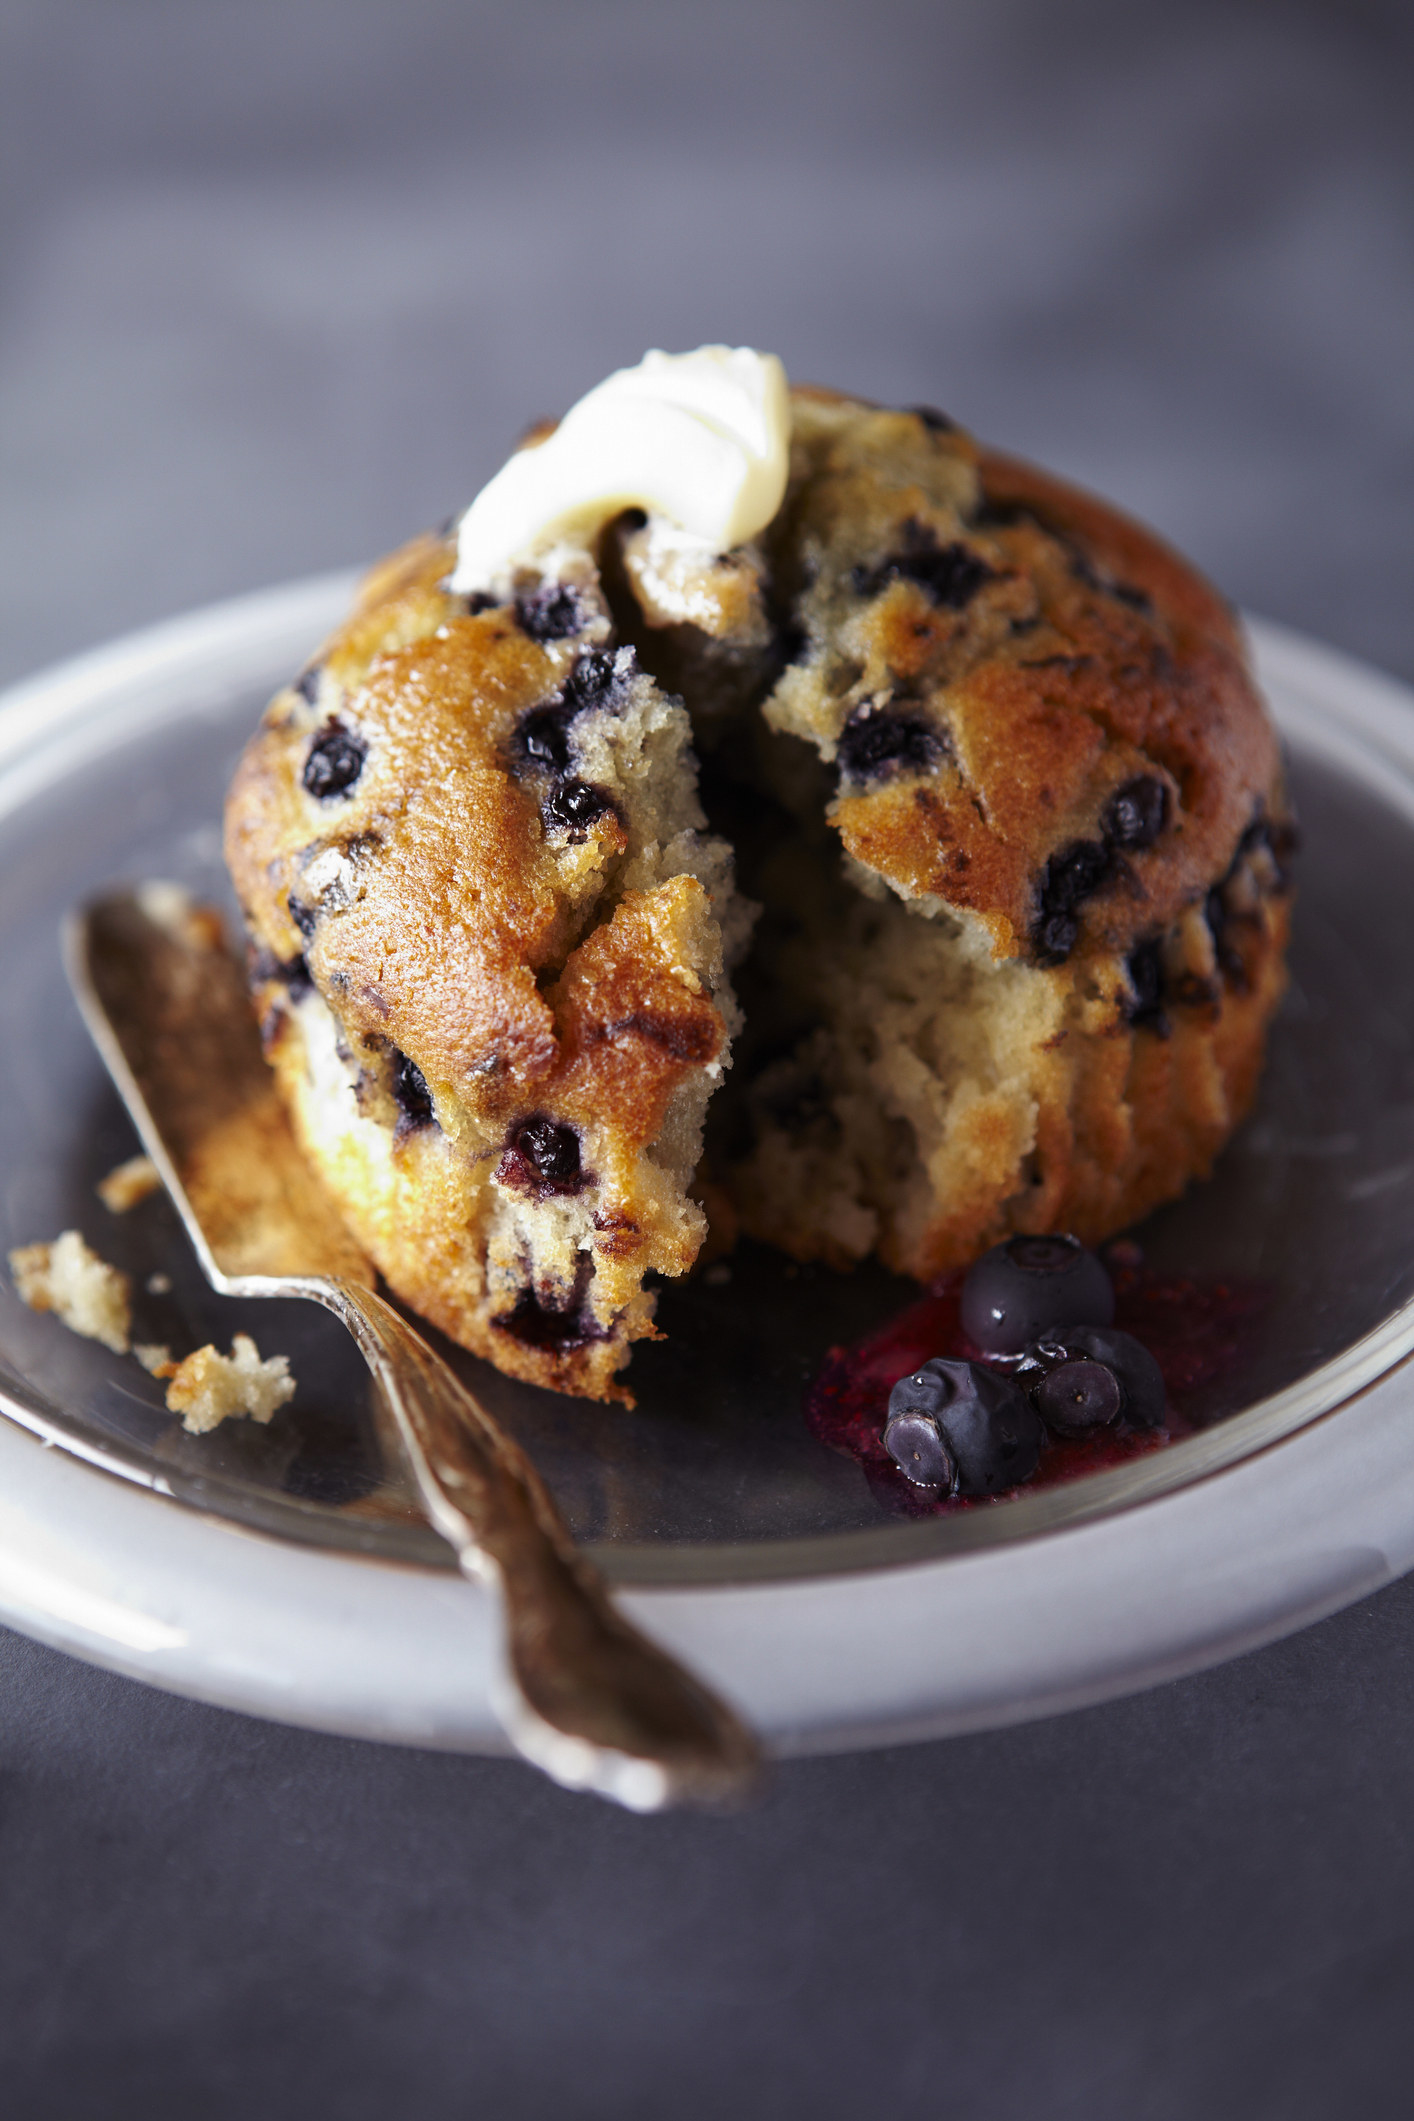 A blueberry muffin with butter.